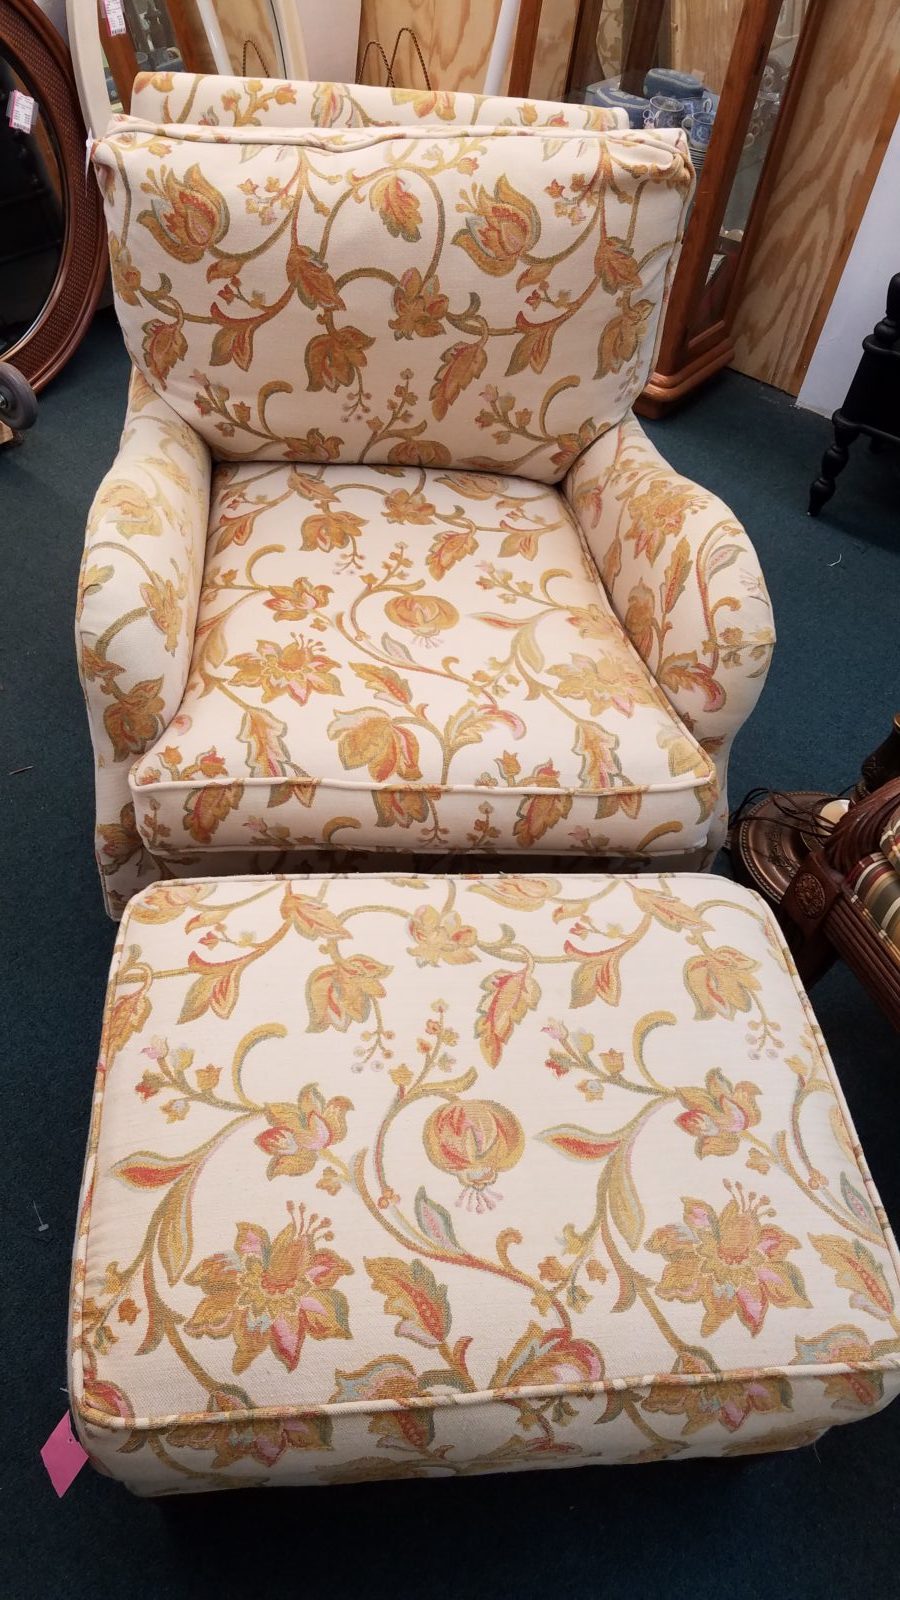 classic paisley/floral chair • There are 2 of these beautiful, classic design chairs & one ottoman